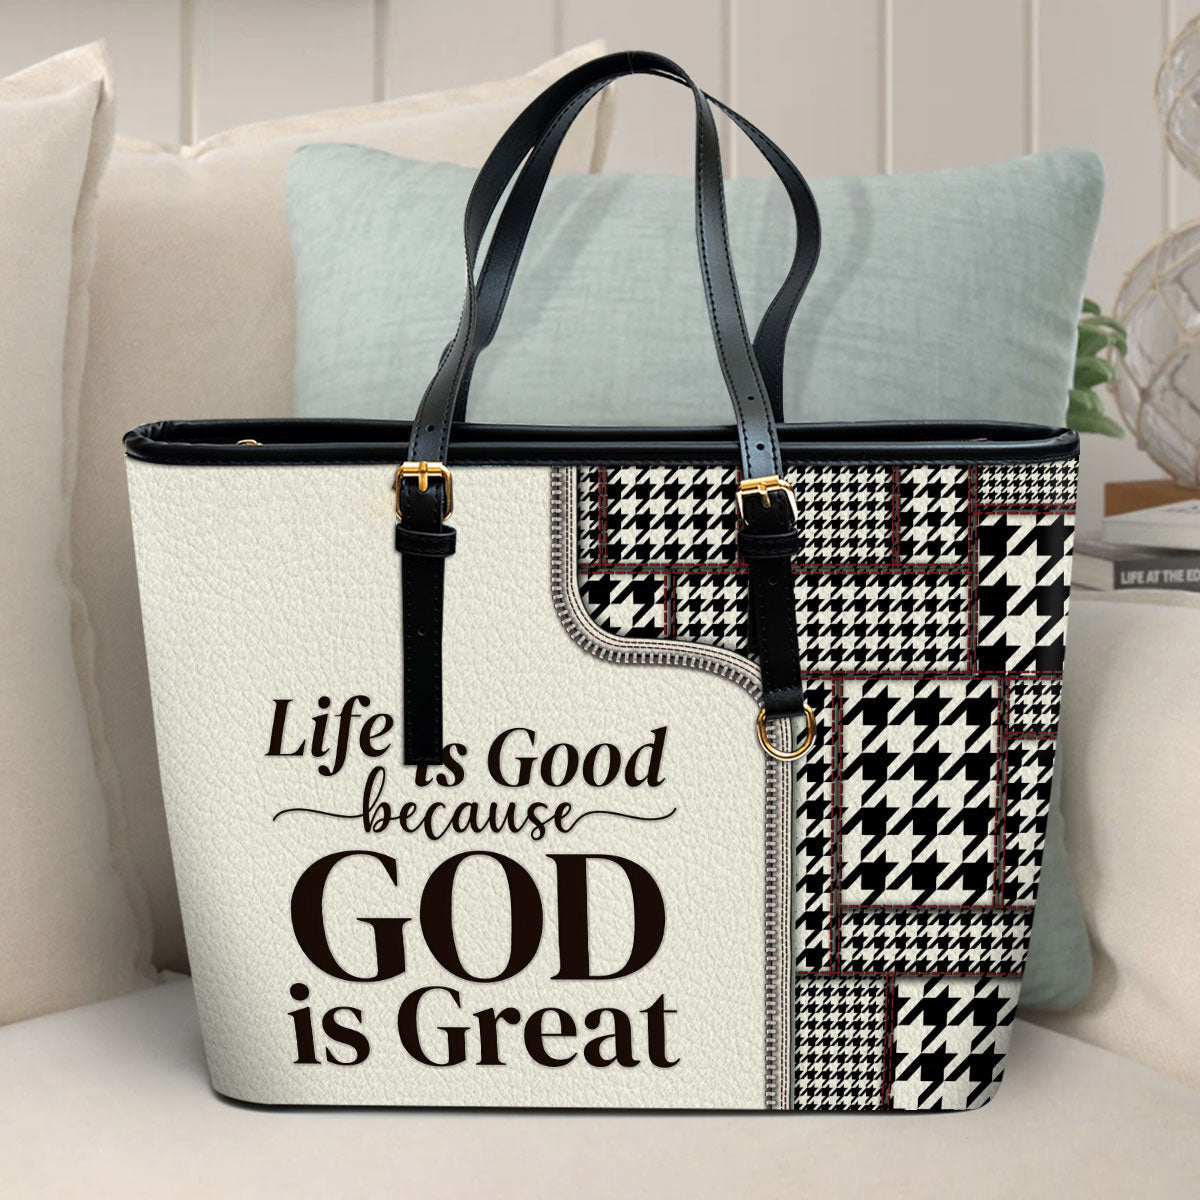 Life Is Good Because God Is Great Large Leather Tote Bag - Christ Gifts For Religious Women - Best Mother's Day Gifts